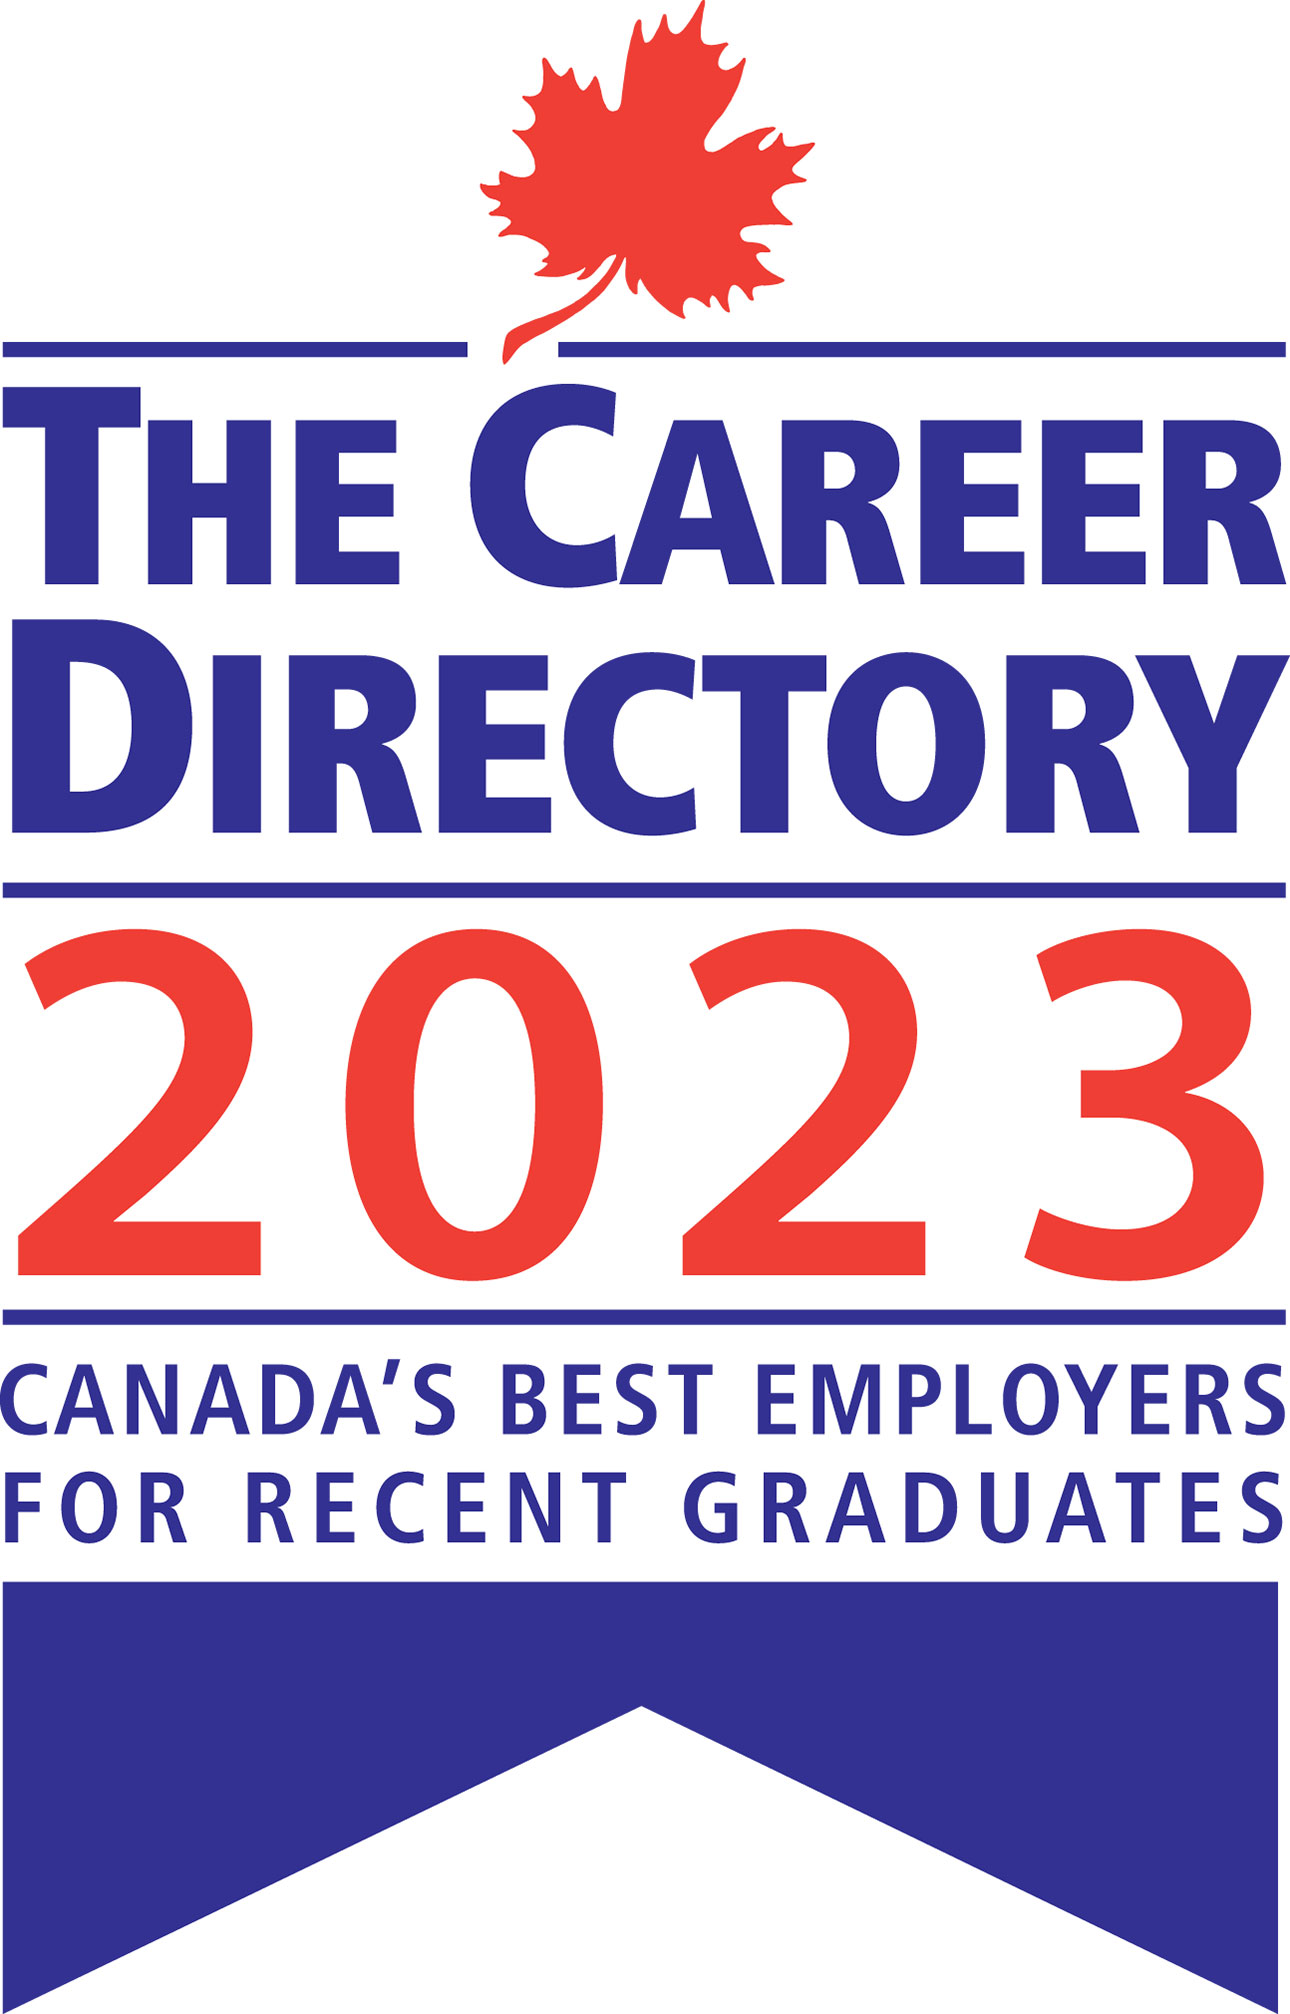 The Career Directory 2023, Canada's best employers for recent graduates